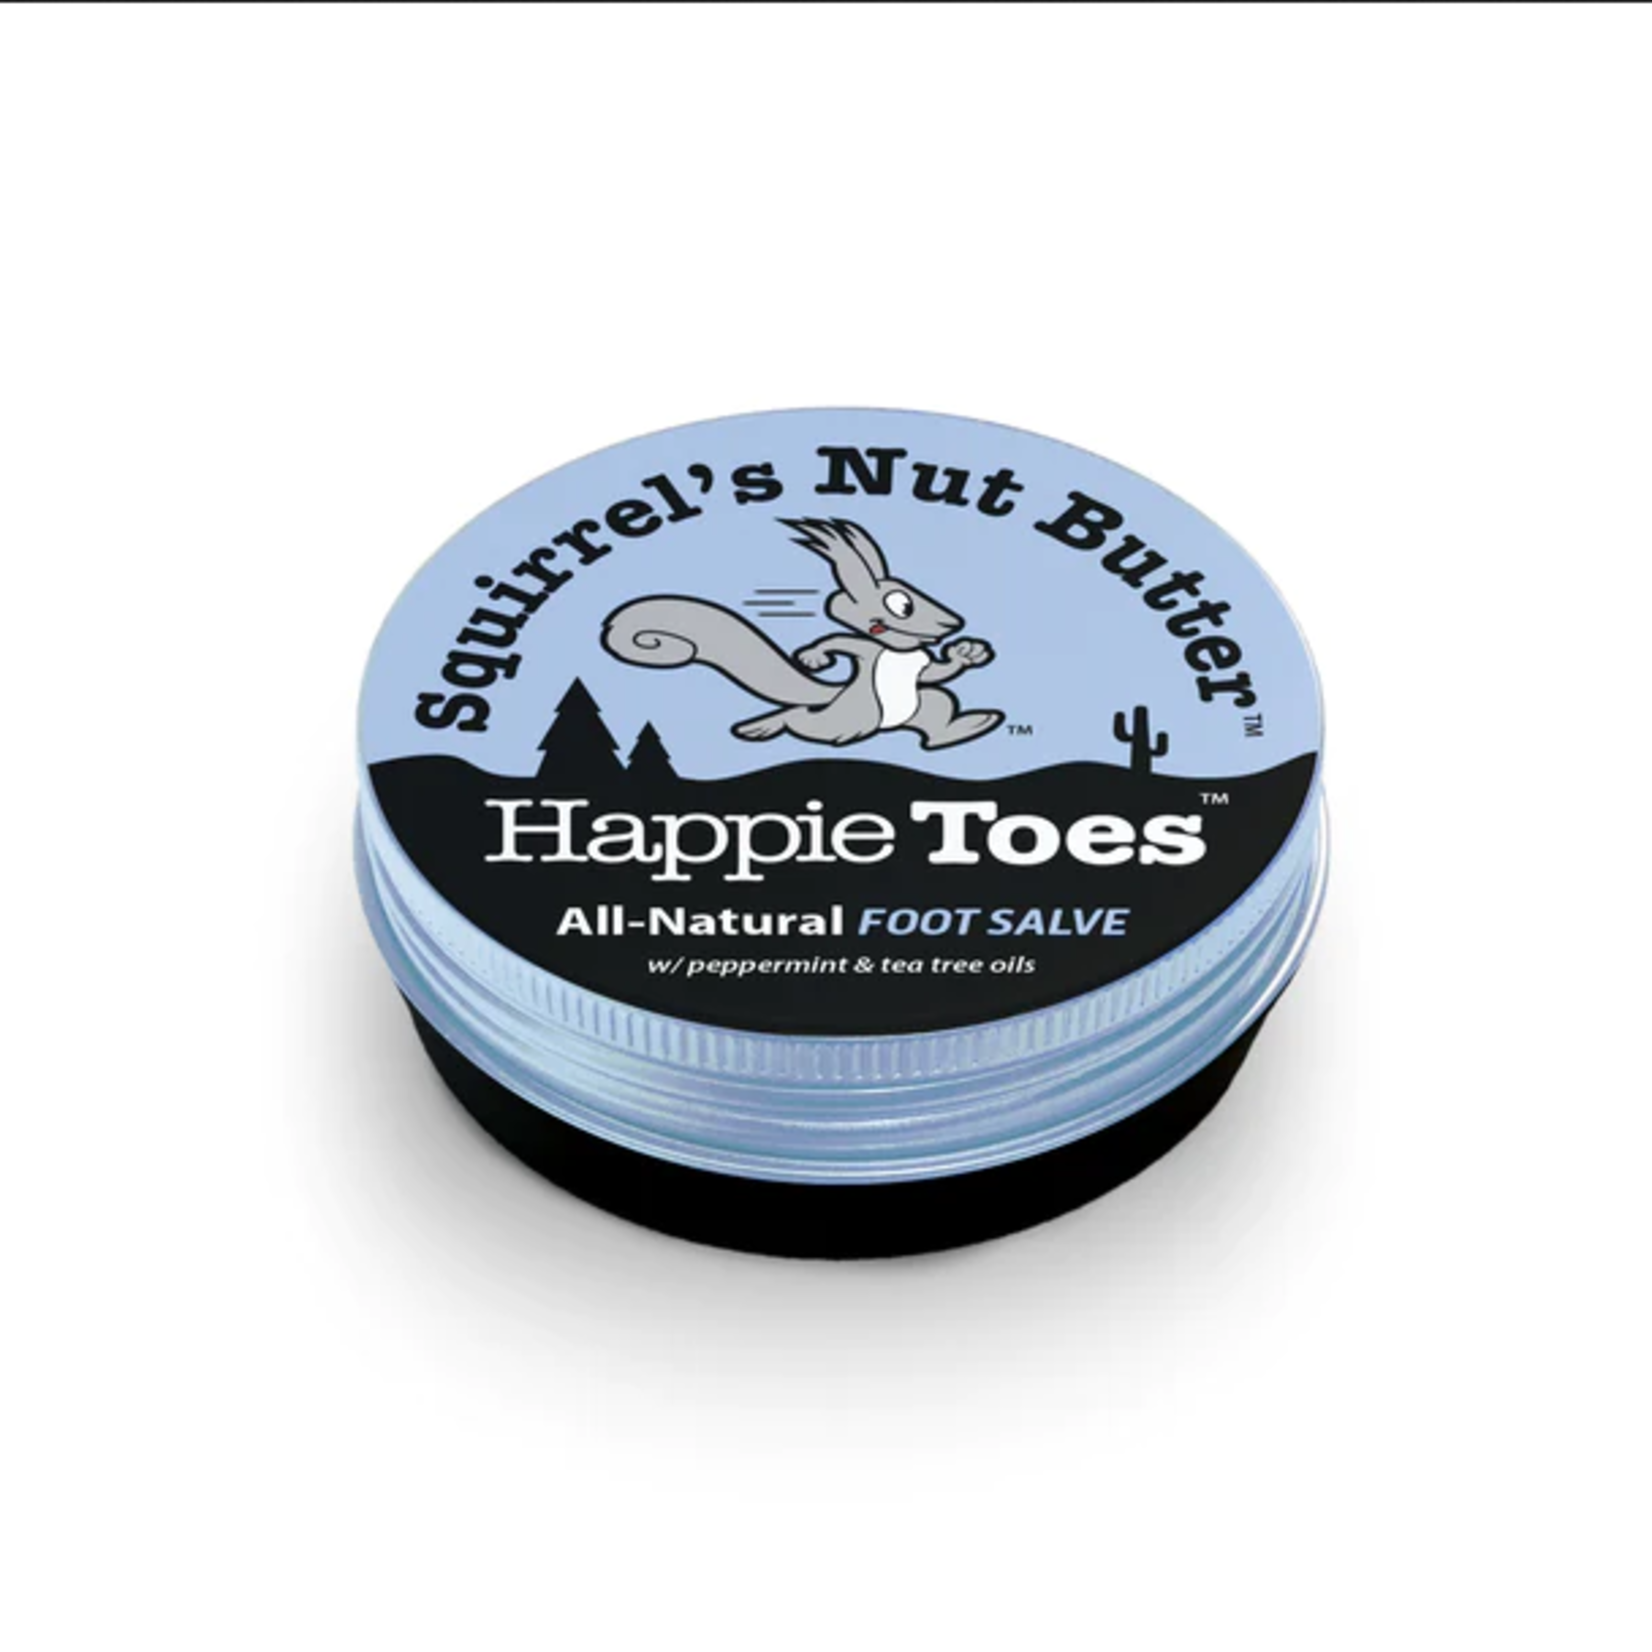 Squirrels Nut Butter SNB Happie Toes Tin 2.0 oz